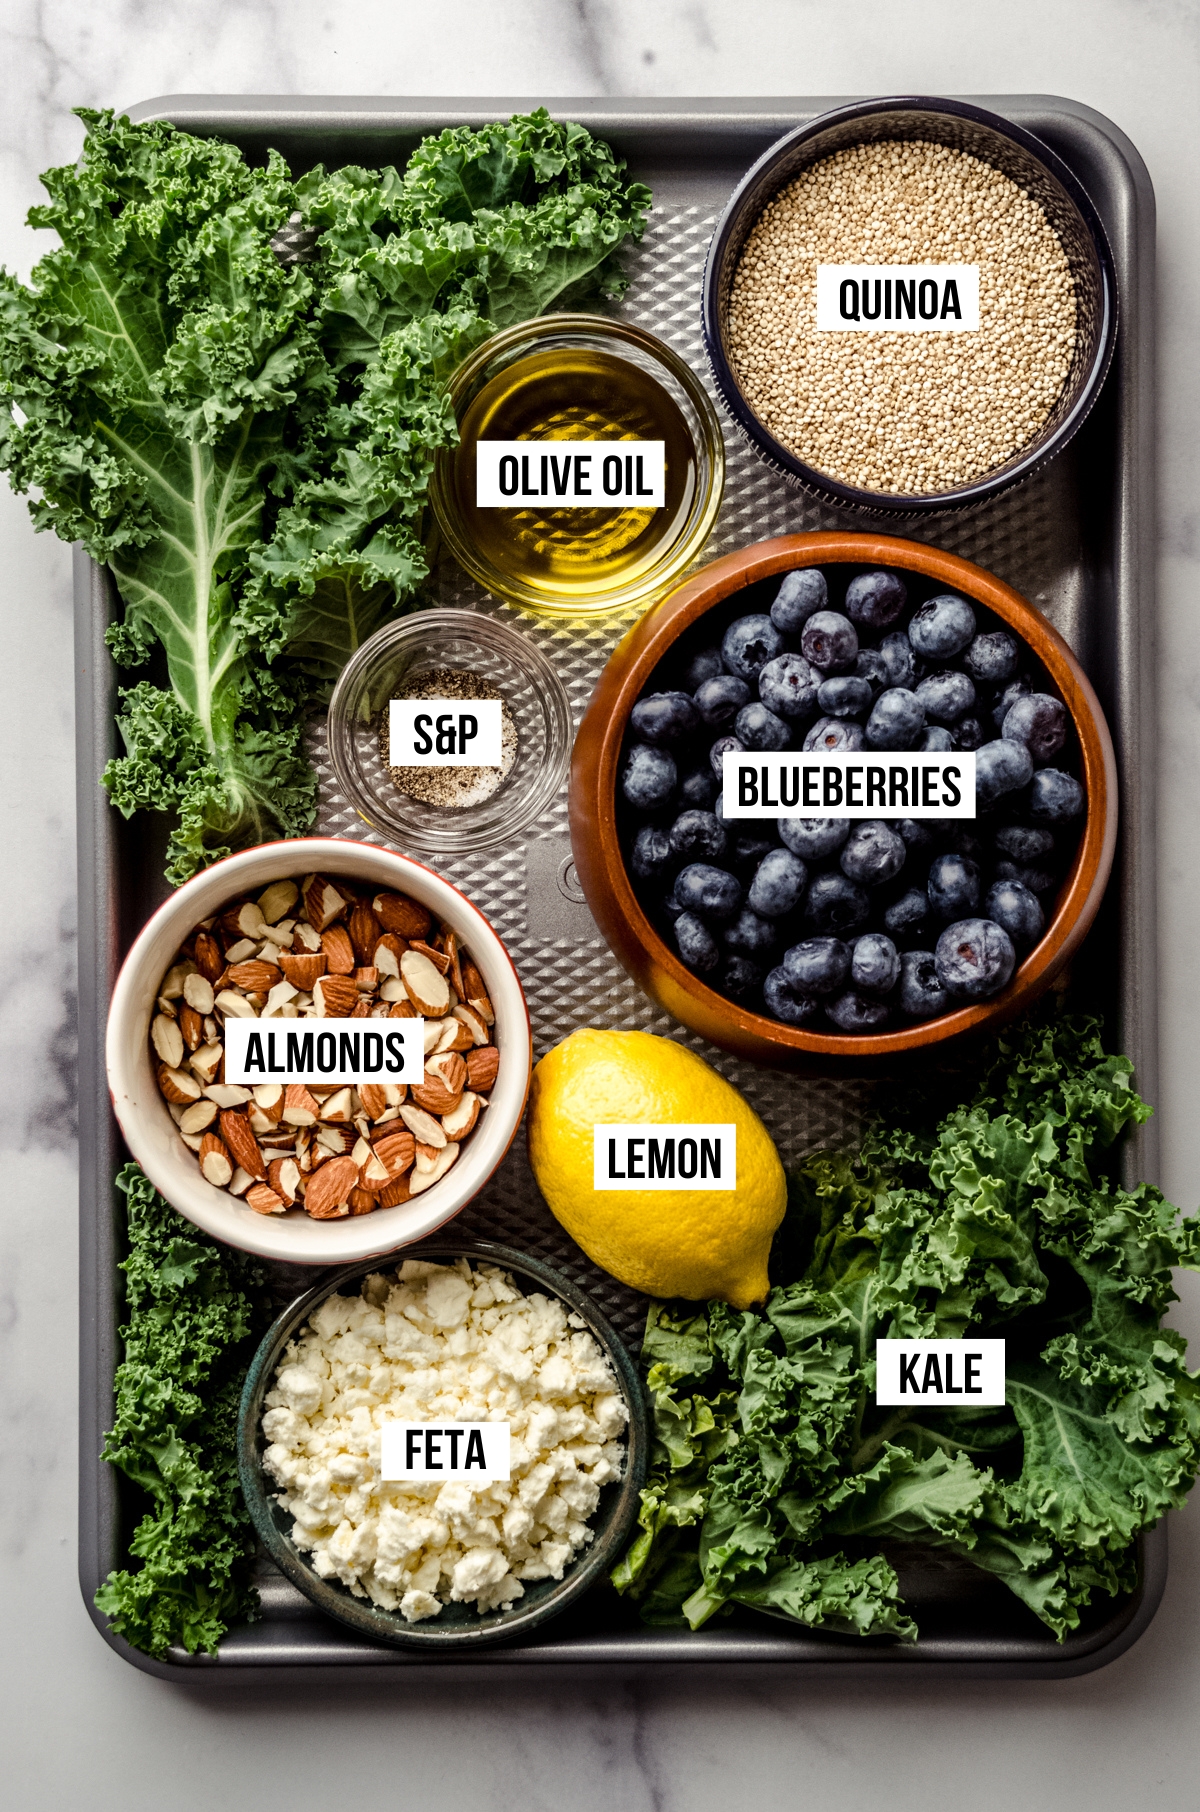 Aerial photo of ingredients for blueberry quinoa kale salad with text overlay.